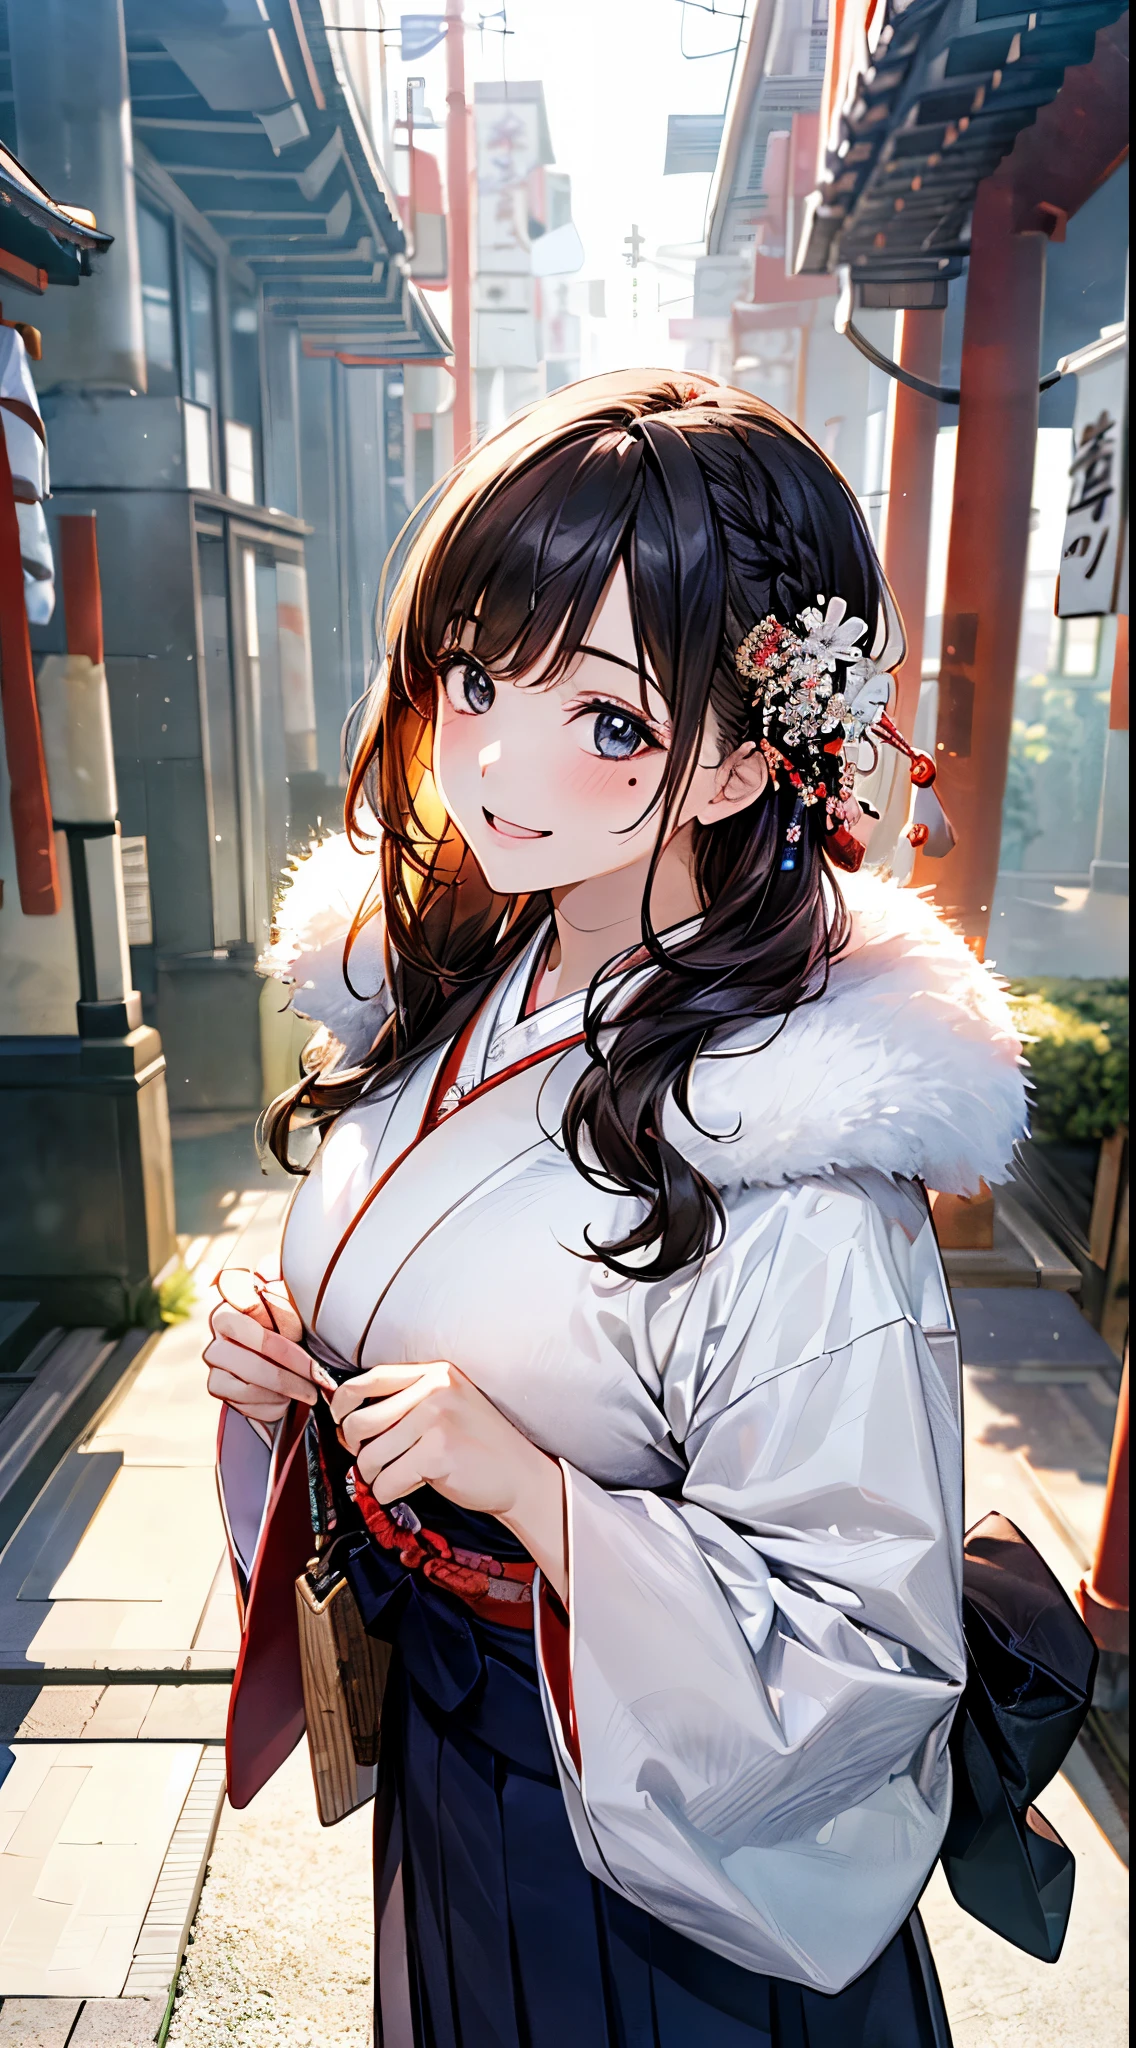 ((perfect anatomy, anatomically correct, super detailed skin)), 
1 girl, japanese, high school girl, shiny skin, large breasts:0.5, looking up, watching the view, 
beautiful hair, beautiful face, beautiful detailed eyes, (middle hair:1.5, japanese hair:1.5), black hair, blue eyes, babyface, mole under eye, 
(((traditional japanese clothing:1.2, fur muffler), hair ornament)), 
((smile:1.5, open your mouth wide)), walking, holding a phone, Holding a handbag, 
(beautiful scenery), winter, dawn, (new year's day, first visit), hokkaido, sapporo, outside hokkaido shrine, crowd, snow, snowfall:1.5, freezing weather, frost, 
(8k, top-quality, masterpiece​:1.2, extremely detailed), (photorealistic), beautiful art, visual art, depth of fields, natural lighting,